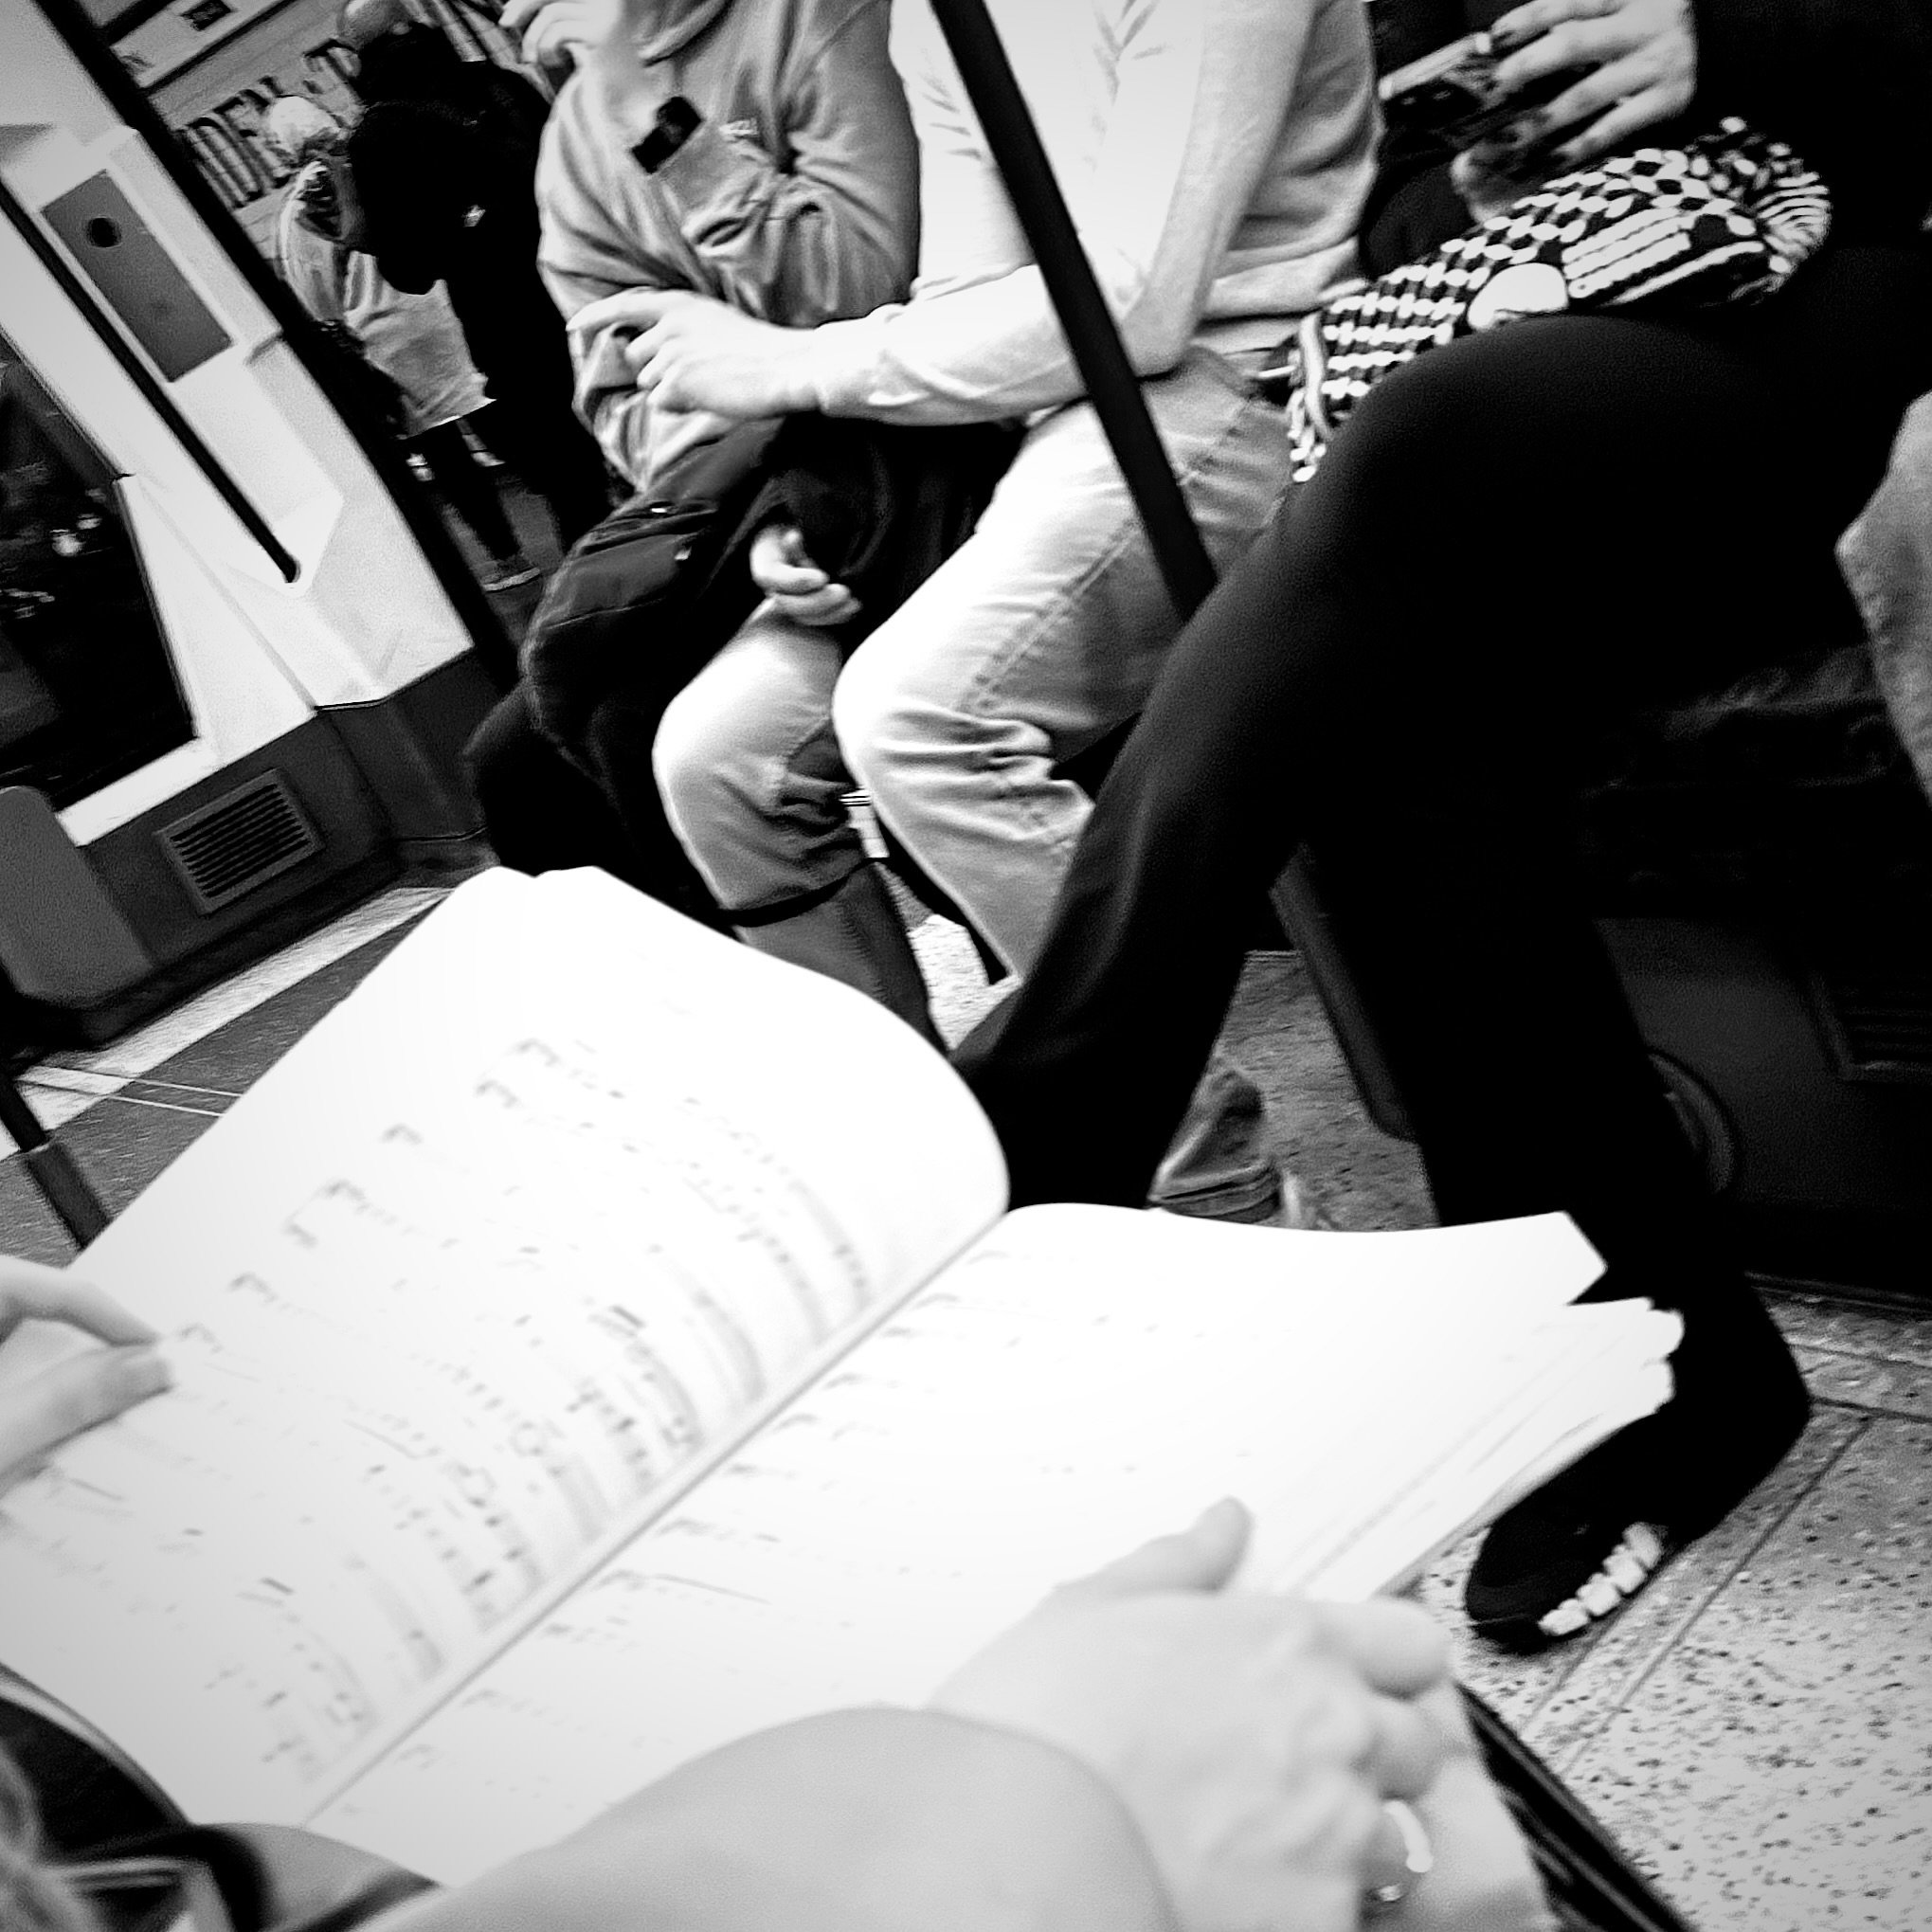 ANONYMOUS MUSETTA

On my way to our matin&eacute;e performance of Madama Butterfly a young singer sits down in the tube right next to me, opens up her piano score and studies Musetta's aria &quot;Quando m'en vo'&quot; from La boh&egrave;me.

Makes me